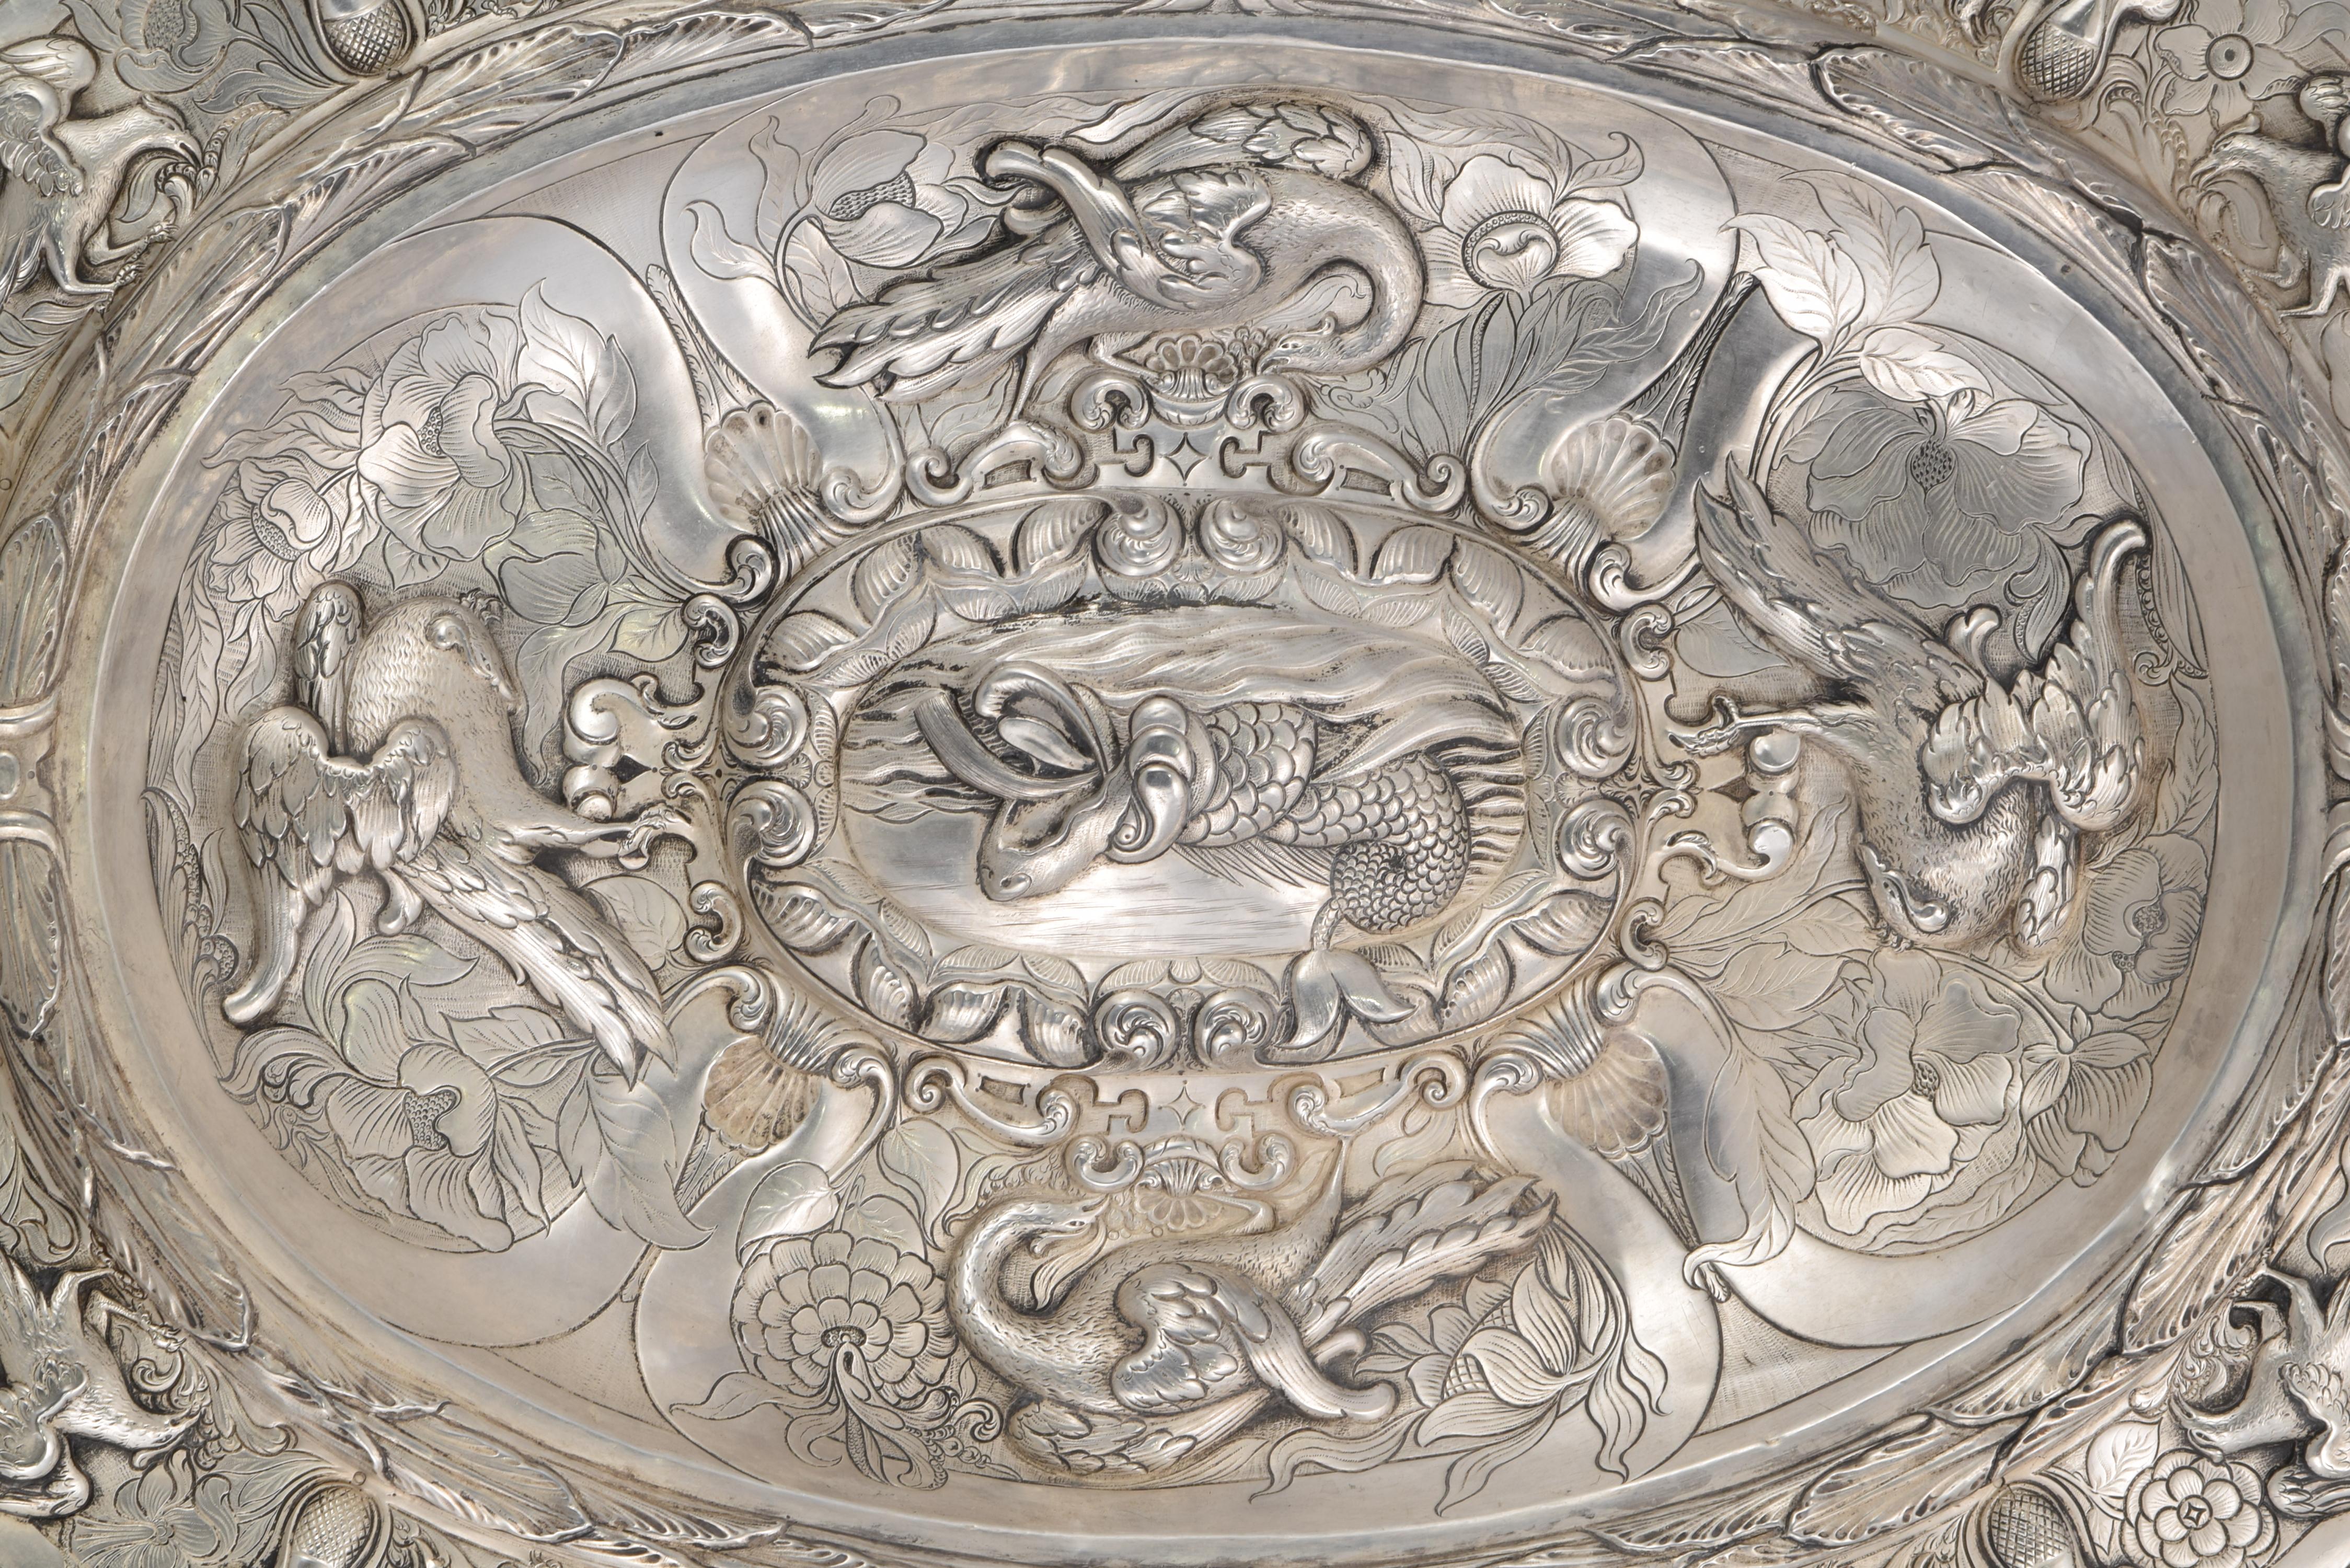 Oval tray. Embossed silver in its color. Tene, Manuel (act.1723-1759). Granada, Spain, 1755.
 With contrast marks.
 Silver tray embossed in its color in an oval shape and decorated with a composition of embossed animals and vegetal elements of a